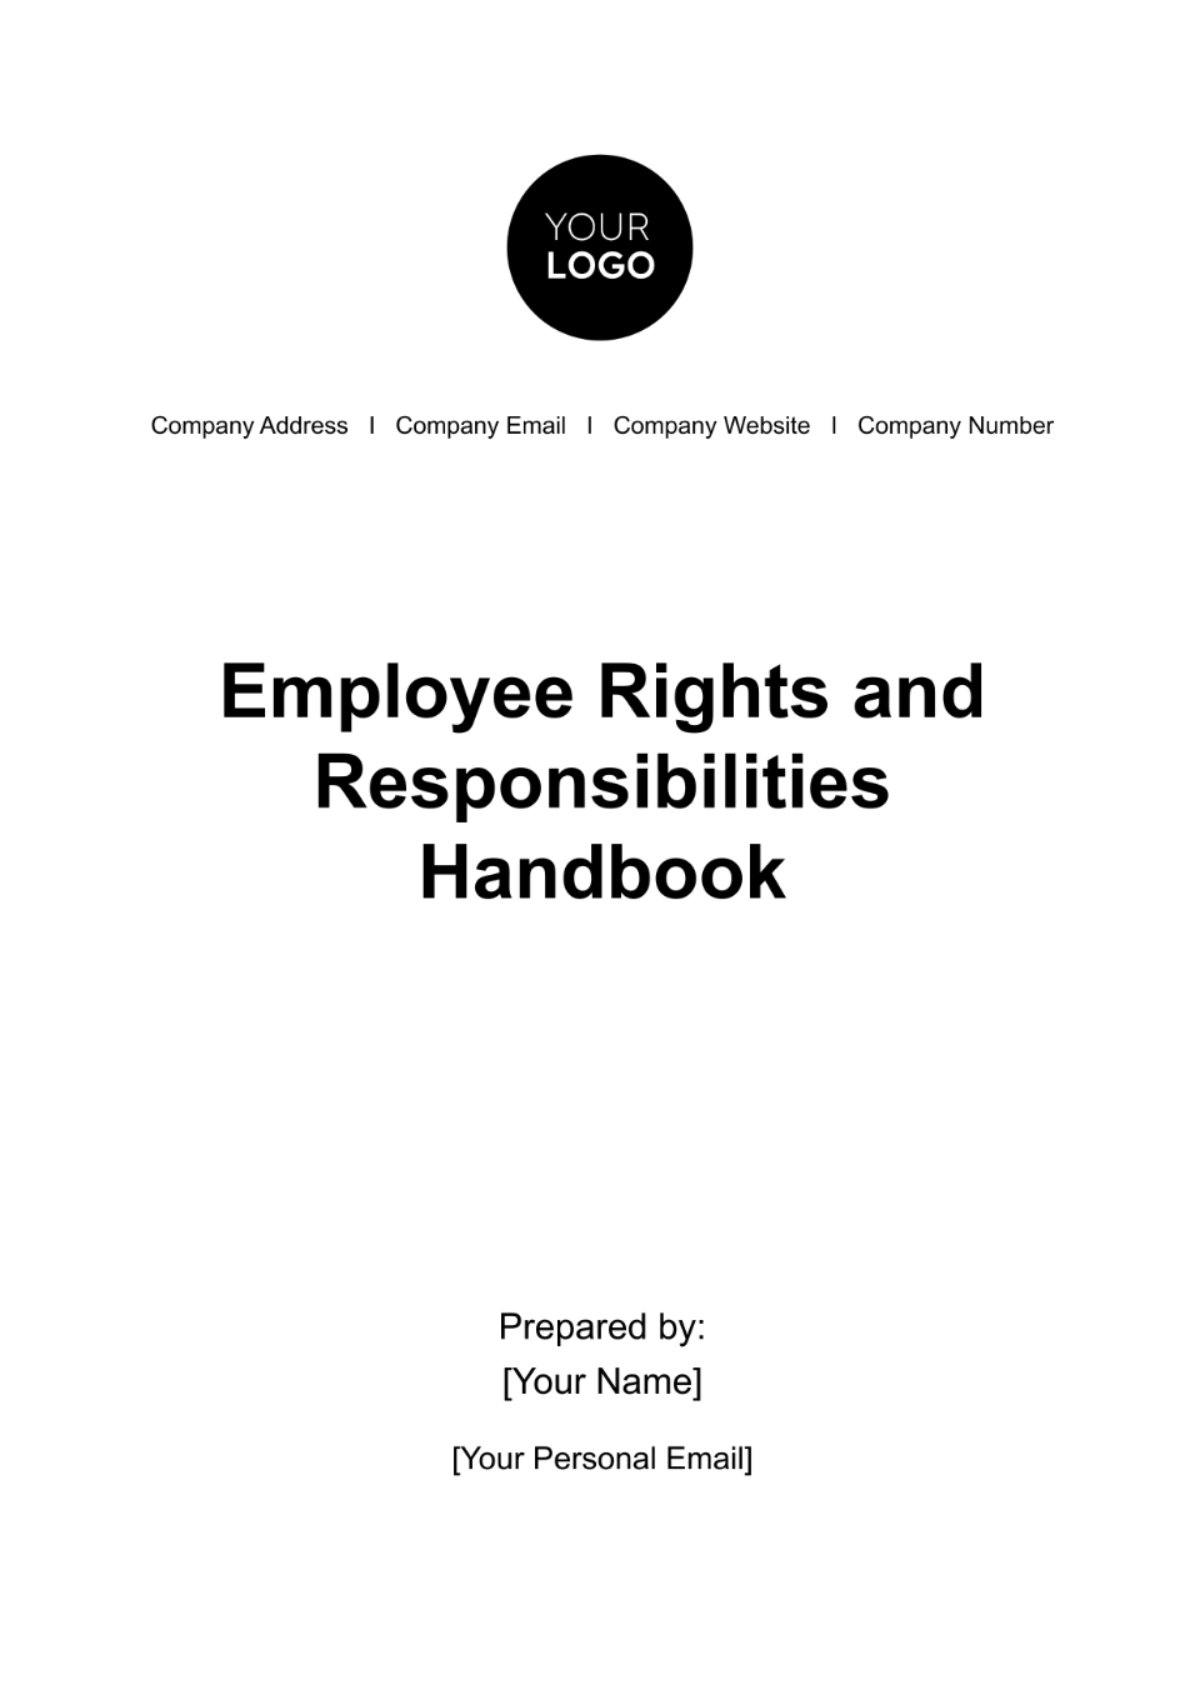 Free Employee Rights and Responsibilities Handbook HR Template